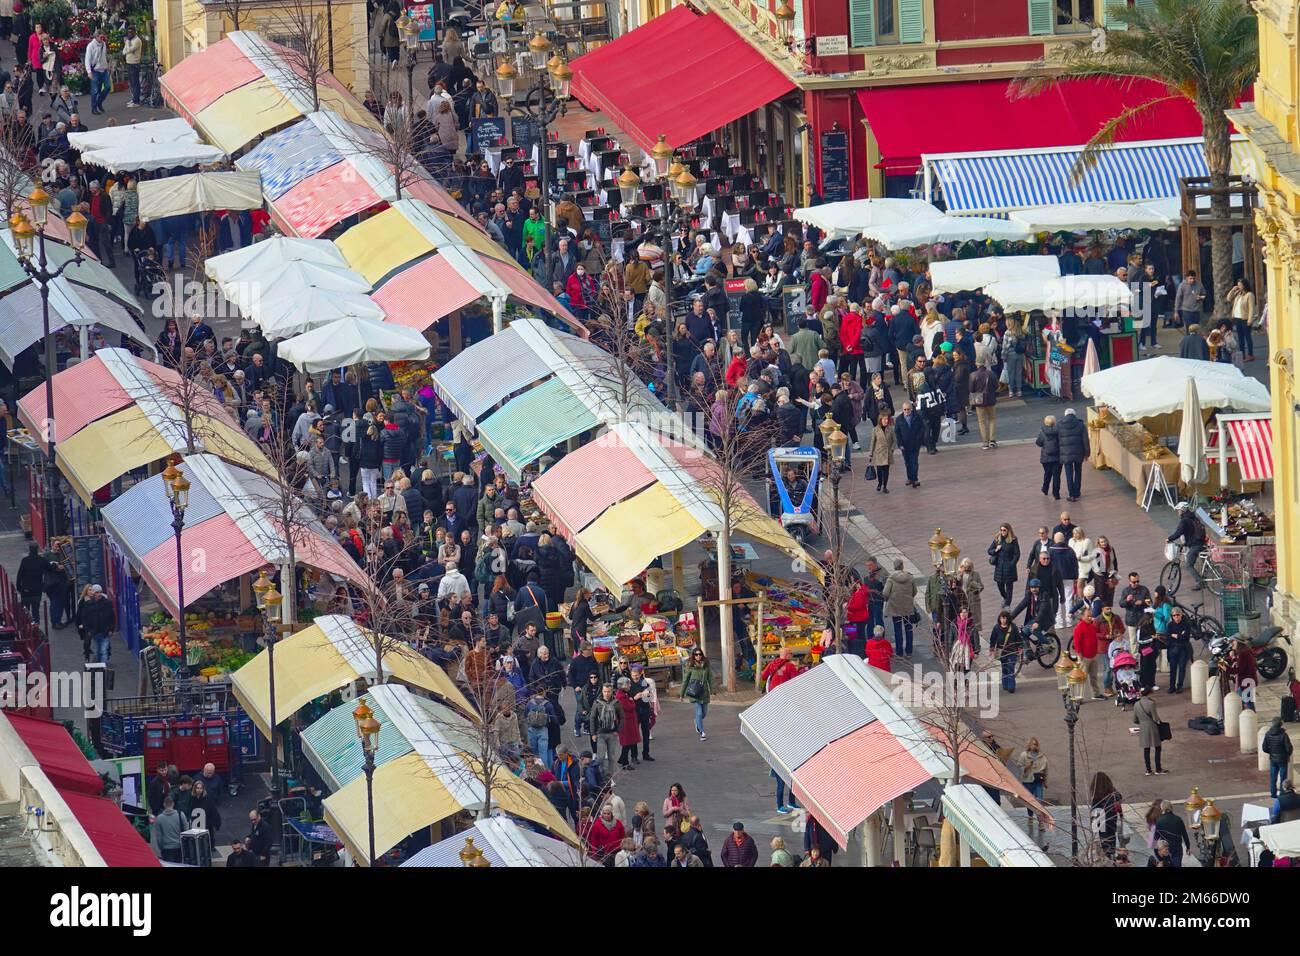 Above view of Cours Saleya market in Nice famous for its flower, vegetable, spice and fish markets. Nice, France - December 2022 Stock Photo